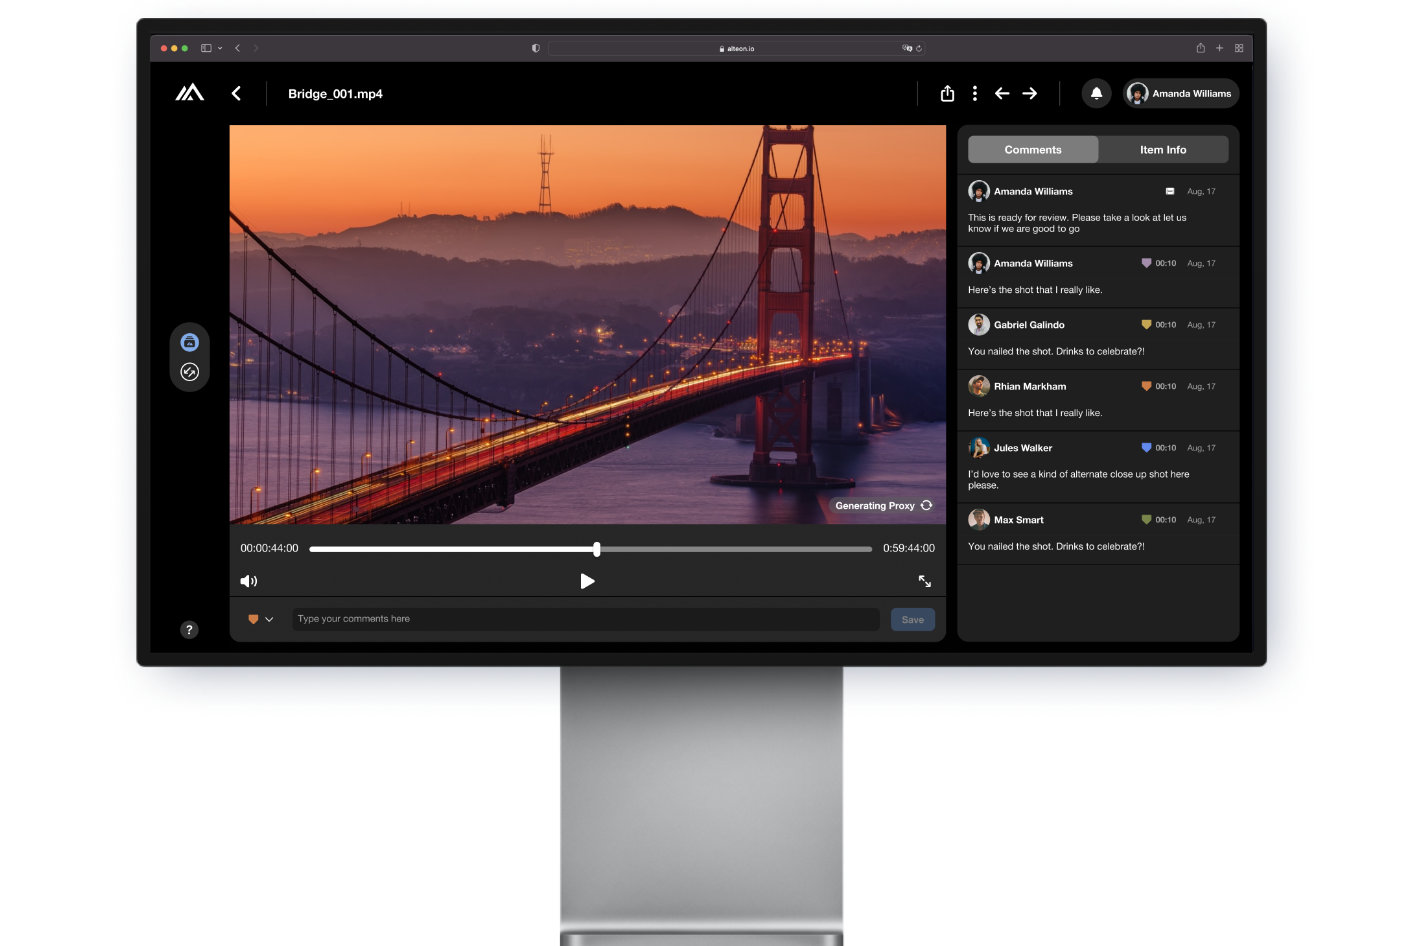 Alteon iPad app: seamlessly connect Final Cut Pro workflows